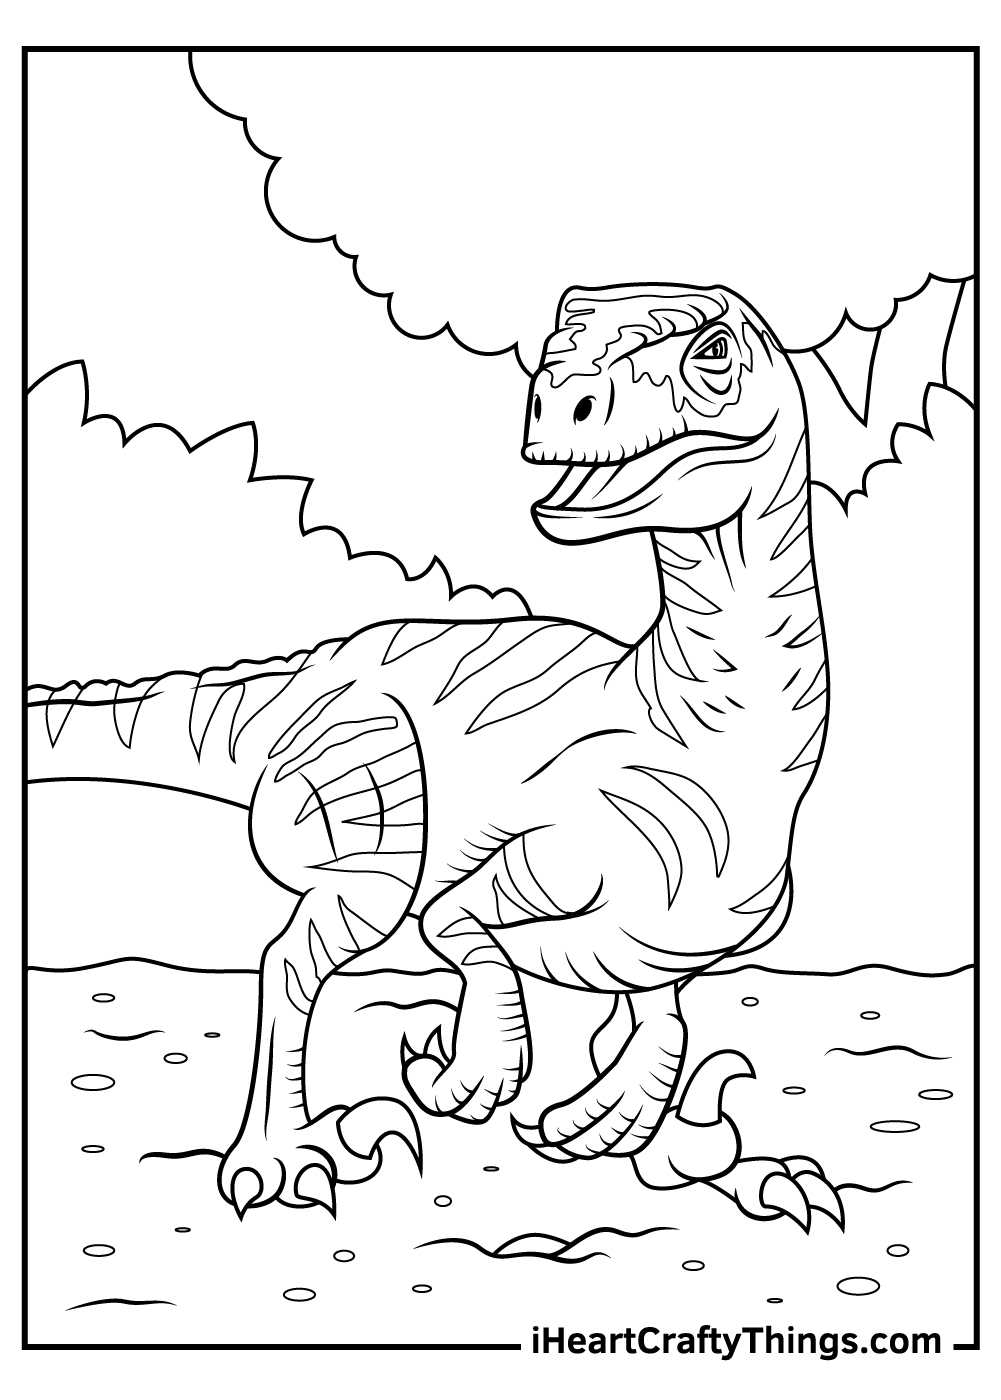 Jurassic park coloring pages free printables